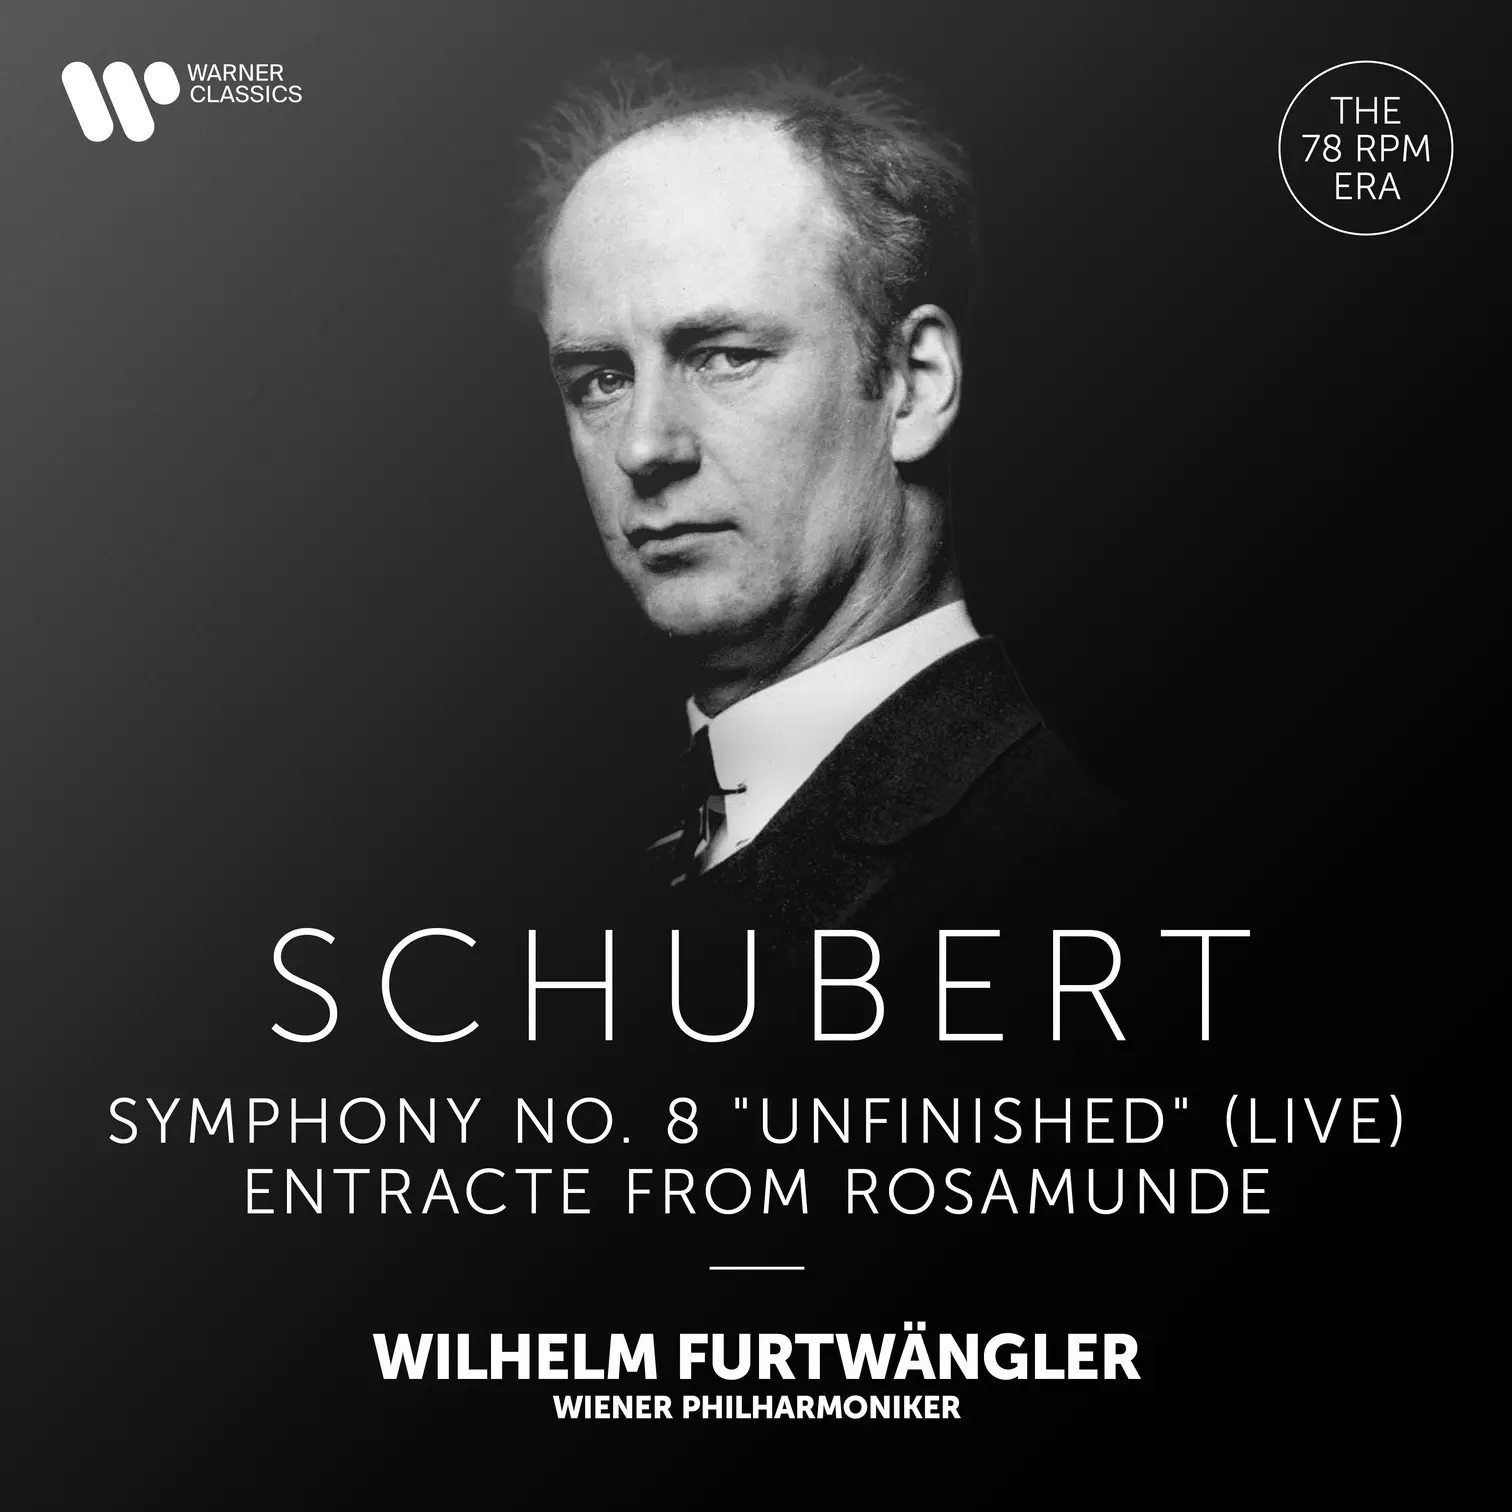 Schubert: Symphony No. 8 “Unfinished” & Entracte from Rosamunde